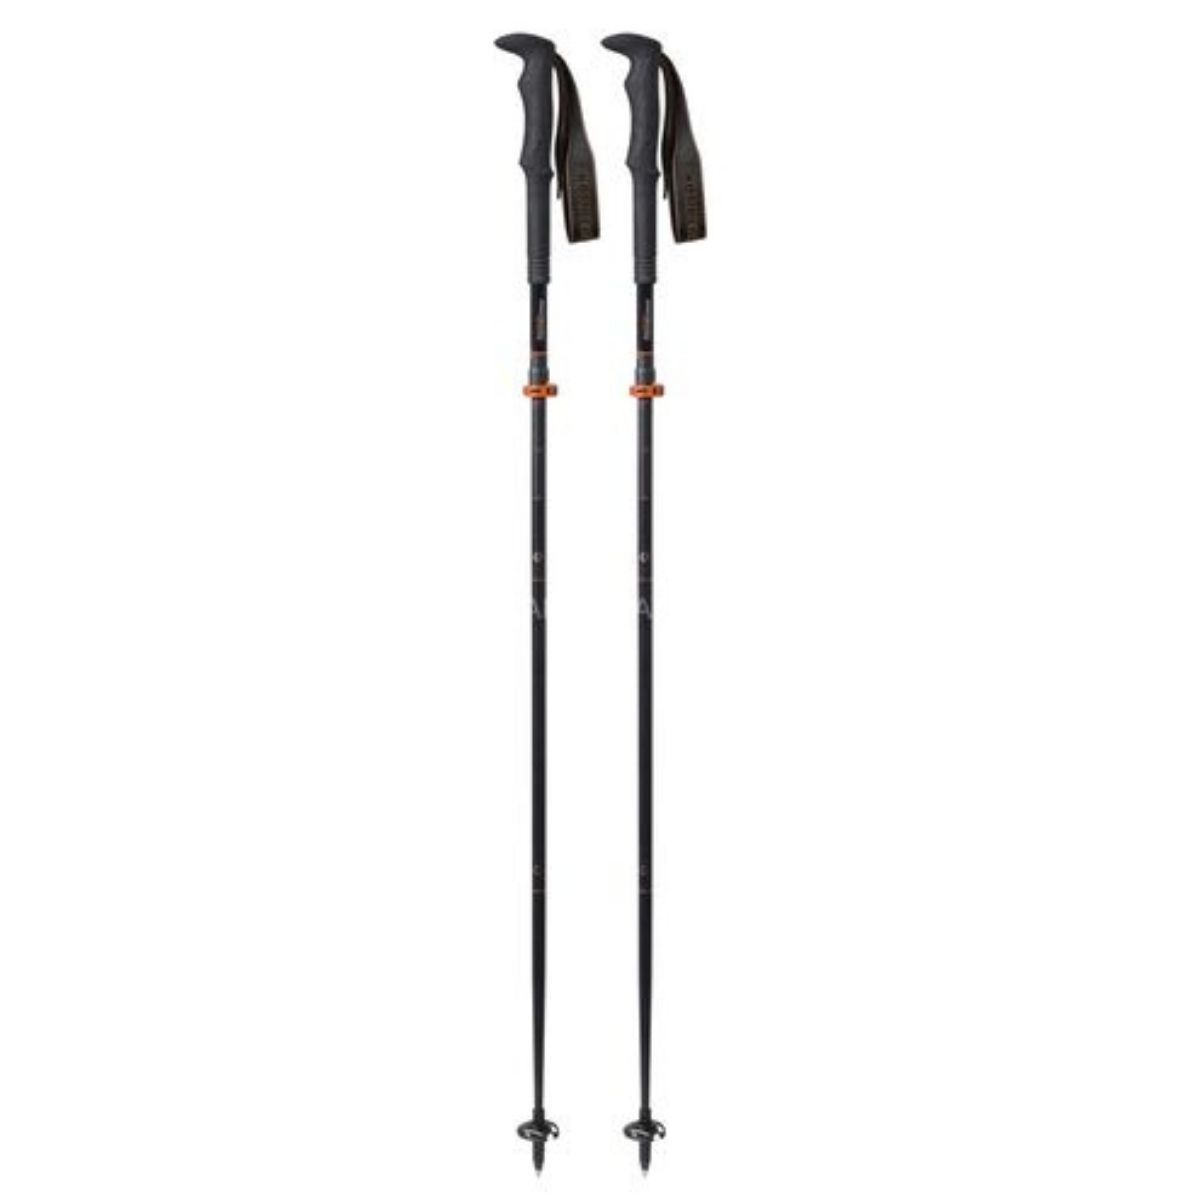 Komperdell Carbon FXP 4 Approach Vario Compact - Running poles